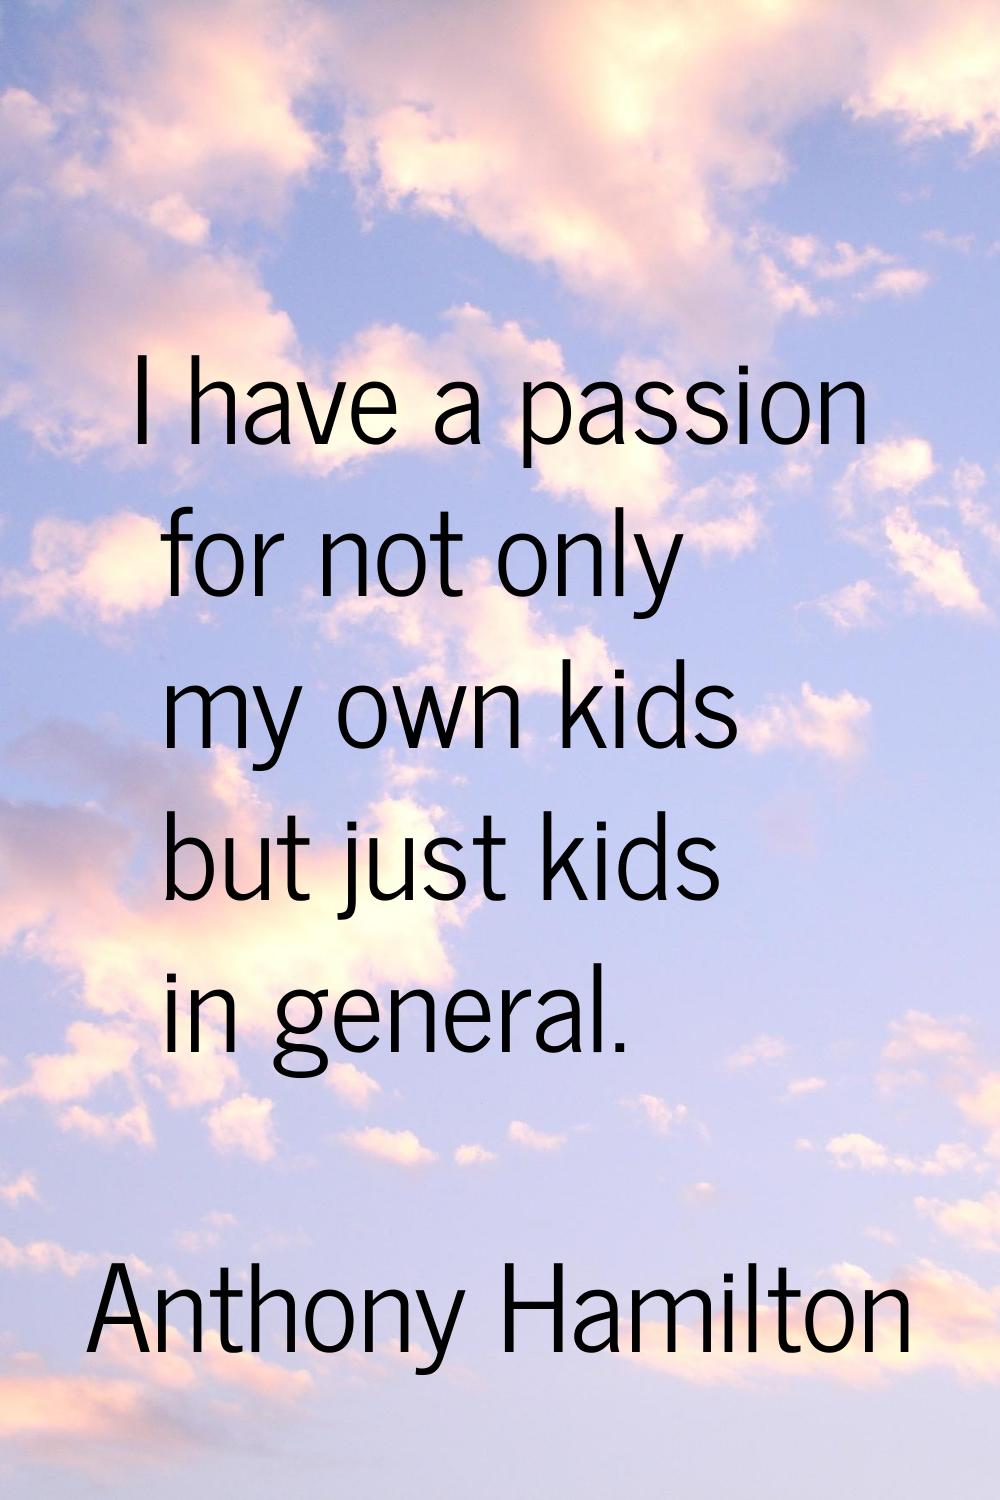 I have a passion for not only my own kids but just kids in general.